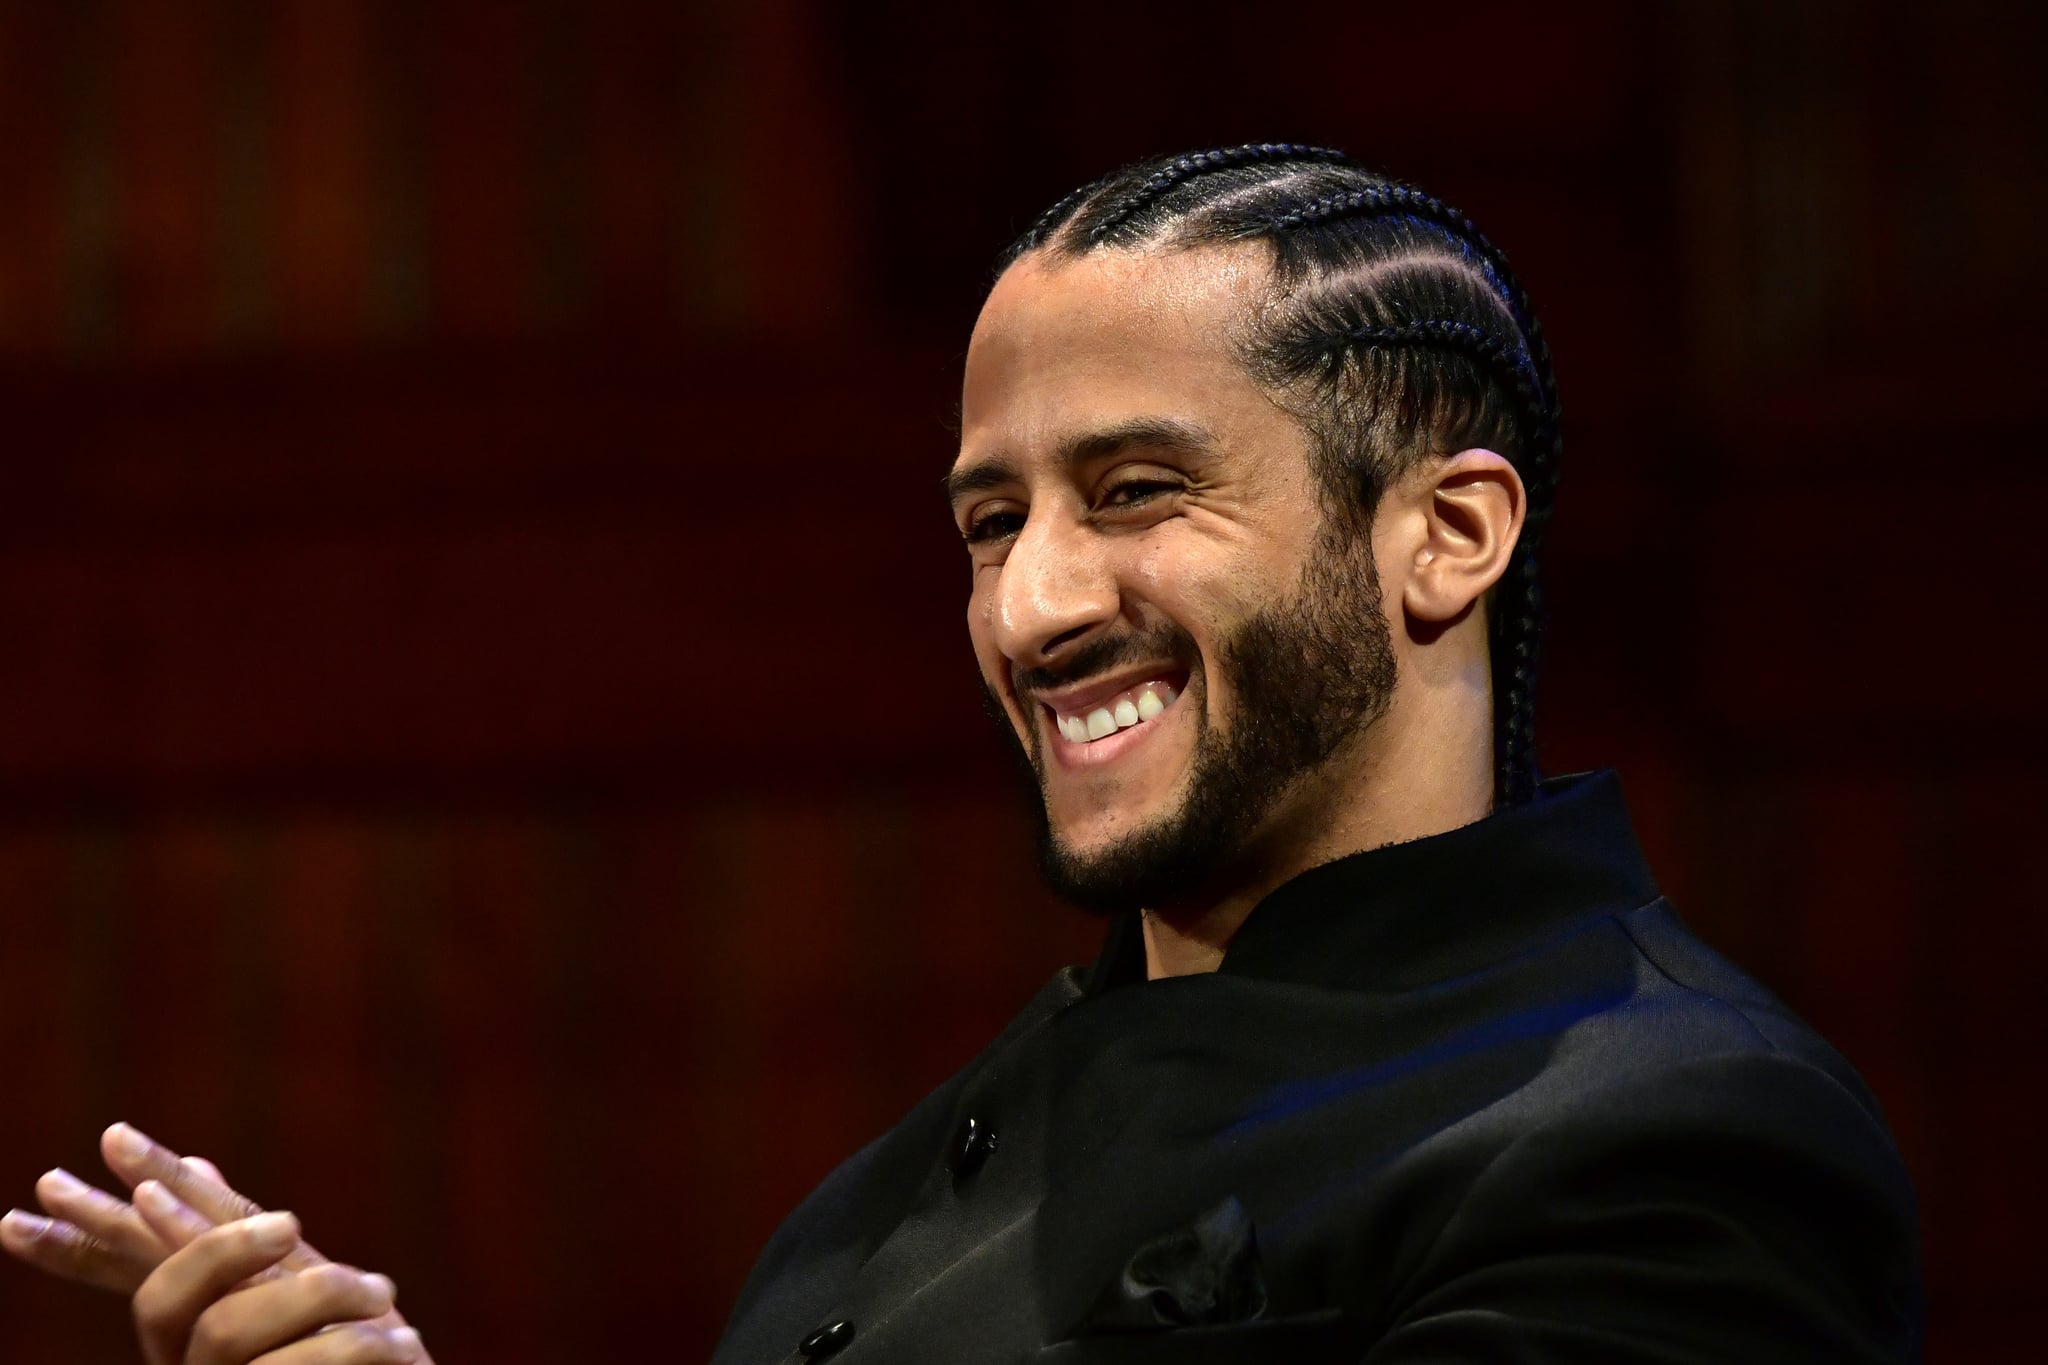 CAMBRIDGE, MA - OCTOBER 11:  Colin Kaepernick on stage at the W.E.B. Du Bois Medal Award Ceremony at Harvard University on October 11, 2018 in Cambridge, Massachusetts.   2018 Honorees included Kehinde Wiley, Florence Ladd, Kenneth Chenault,  Shirley Ann Jackson, Pamela Joyner, Bryan Stevenson, Dave Chappelle and Colin Kaepernick.  (Photo by Paul Marotta/Getty Images)